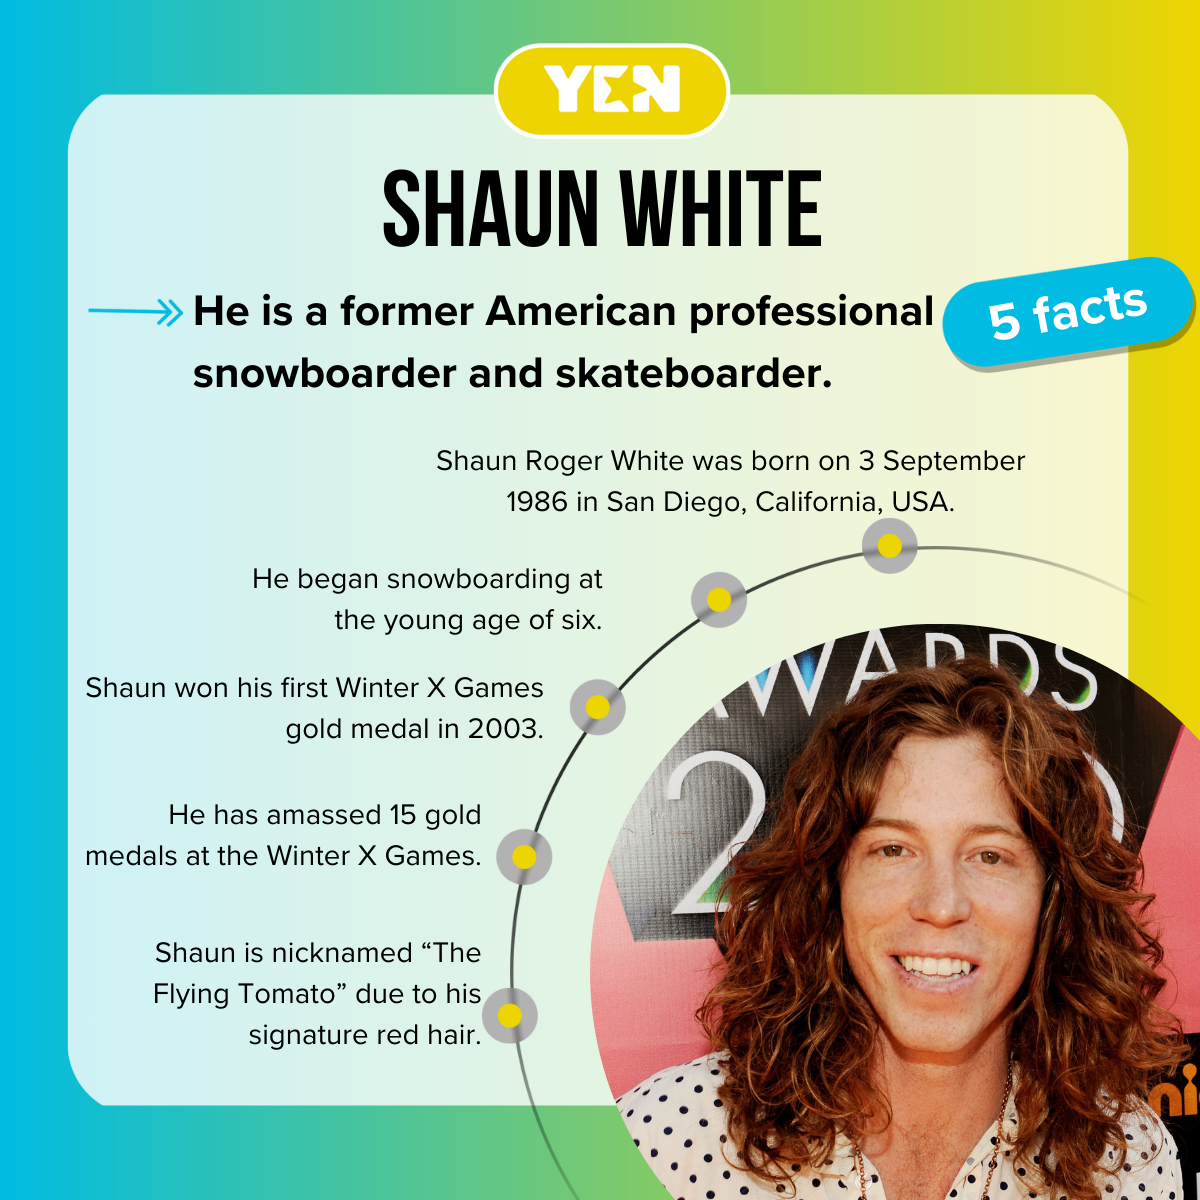 Facts about Shawn White